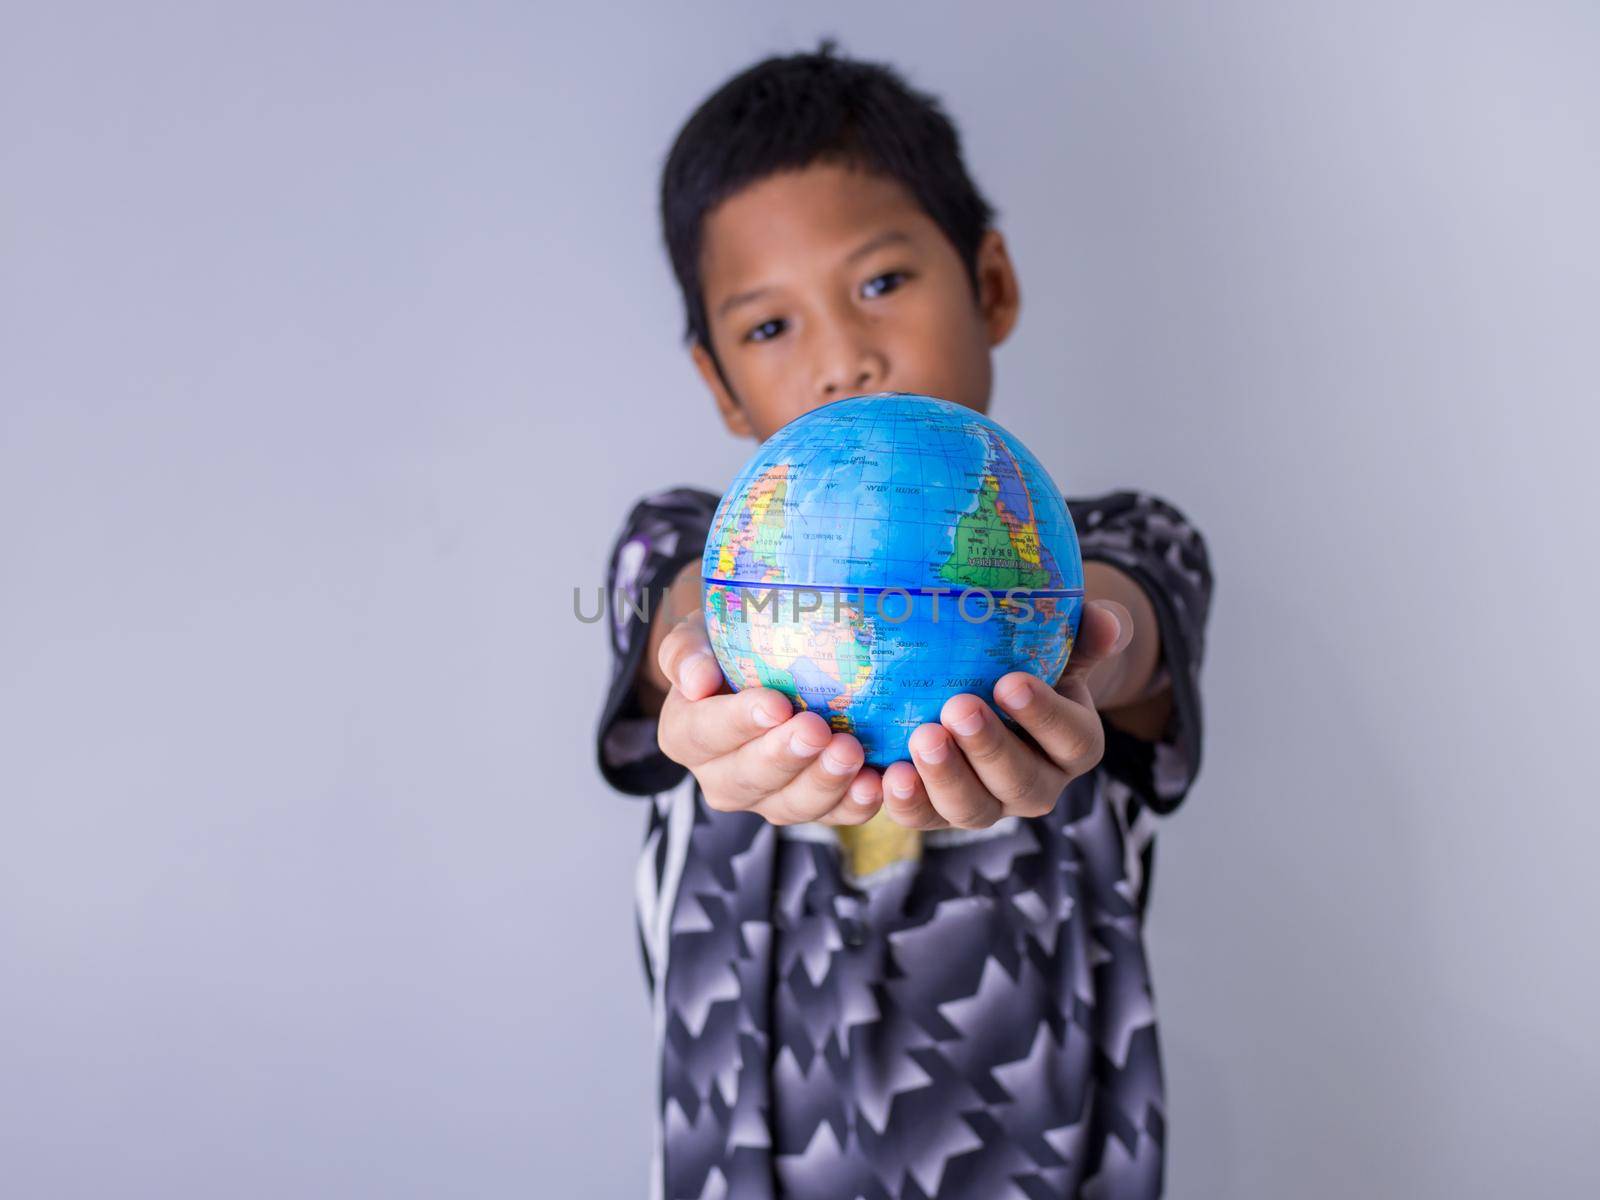 boy holding a globe stand out in front Show the power of the new generation to continue to develop our world.